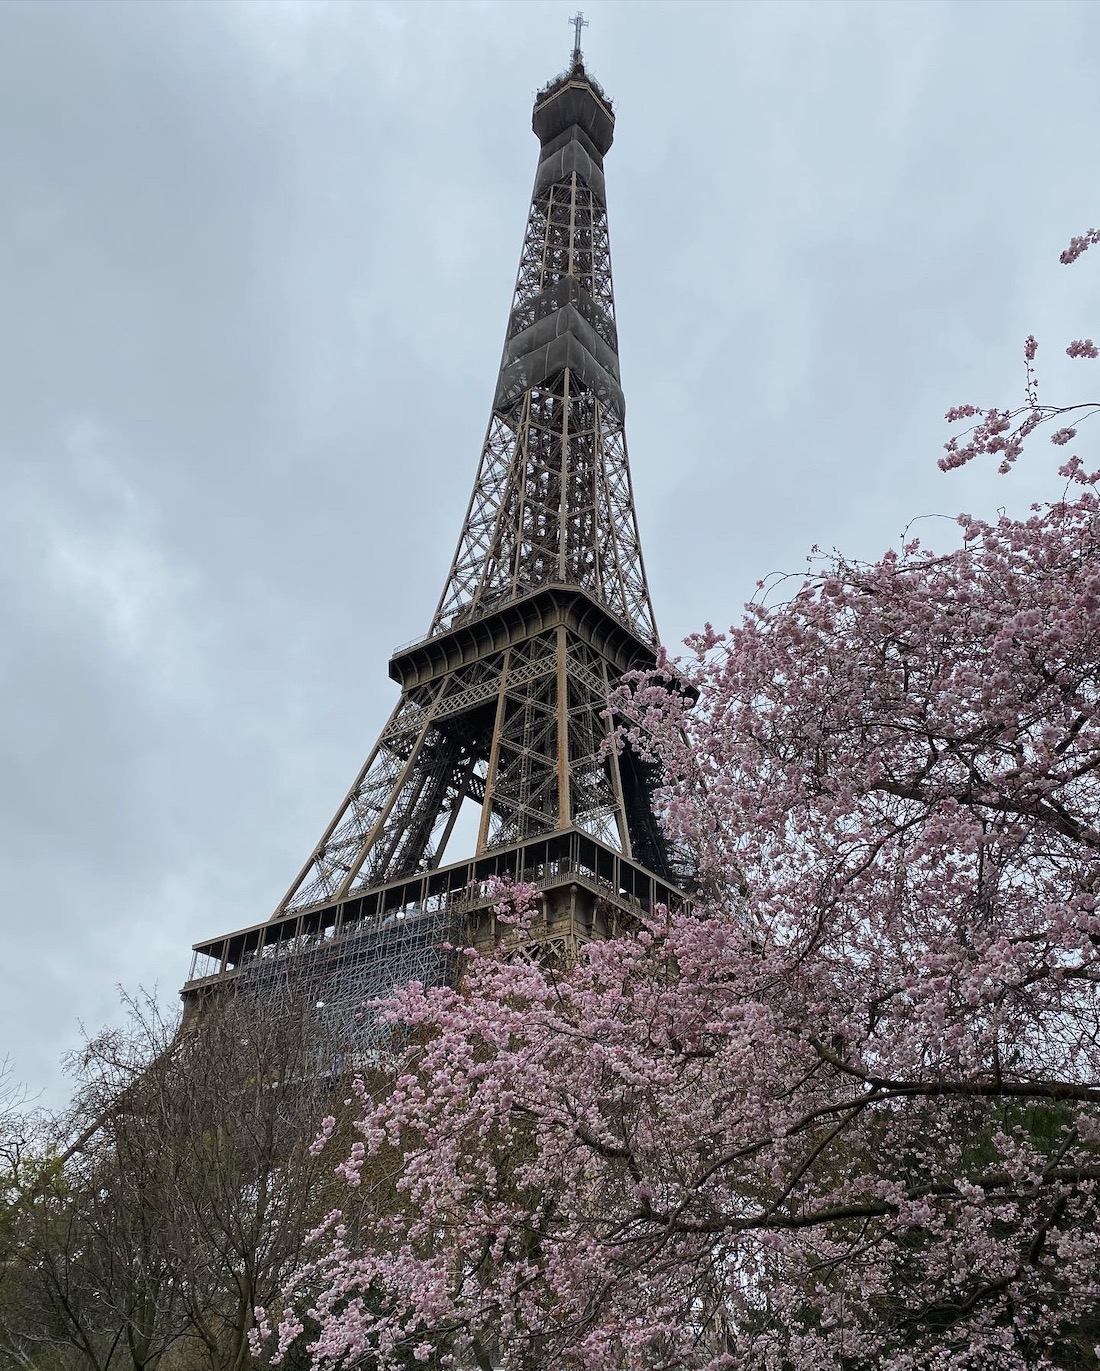 A shot from street level of the Eiffel Tower with pink flowering trees in the foreground